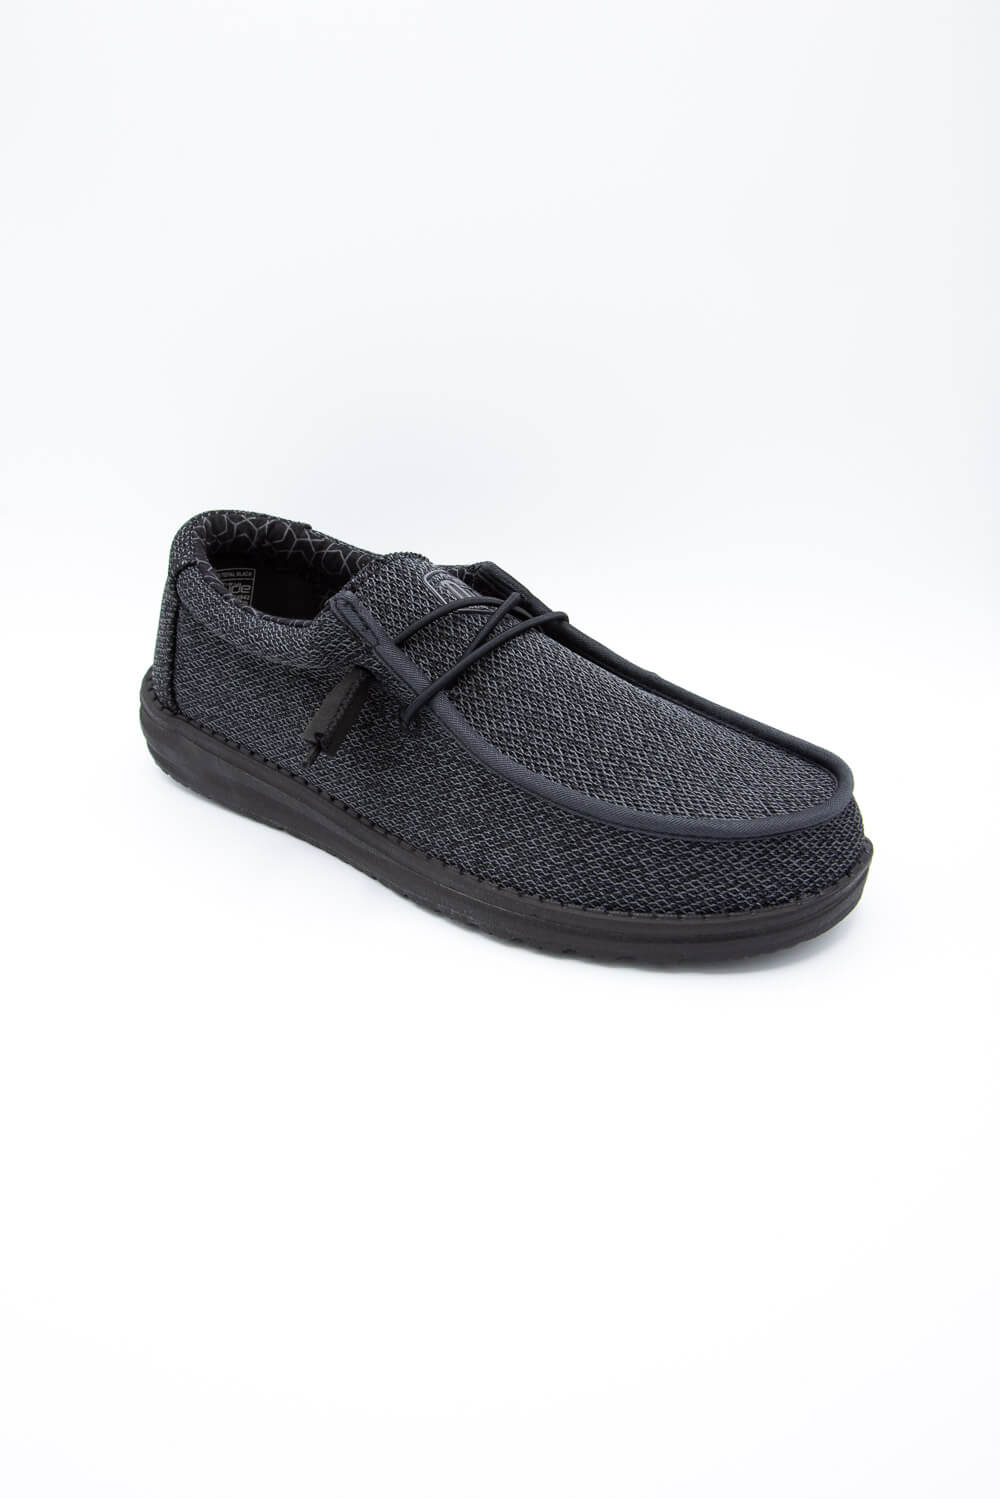 HEYDUDE Men's Wally Sox Shoes in Micro Total Black